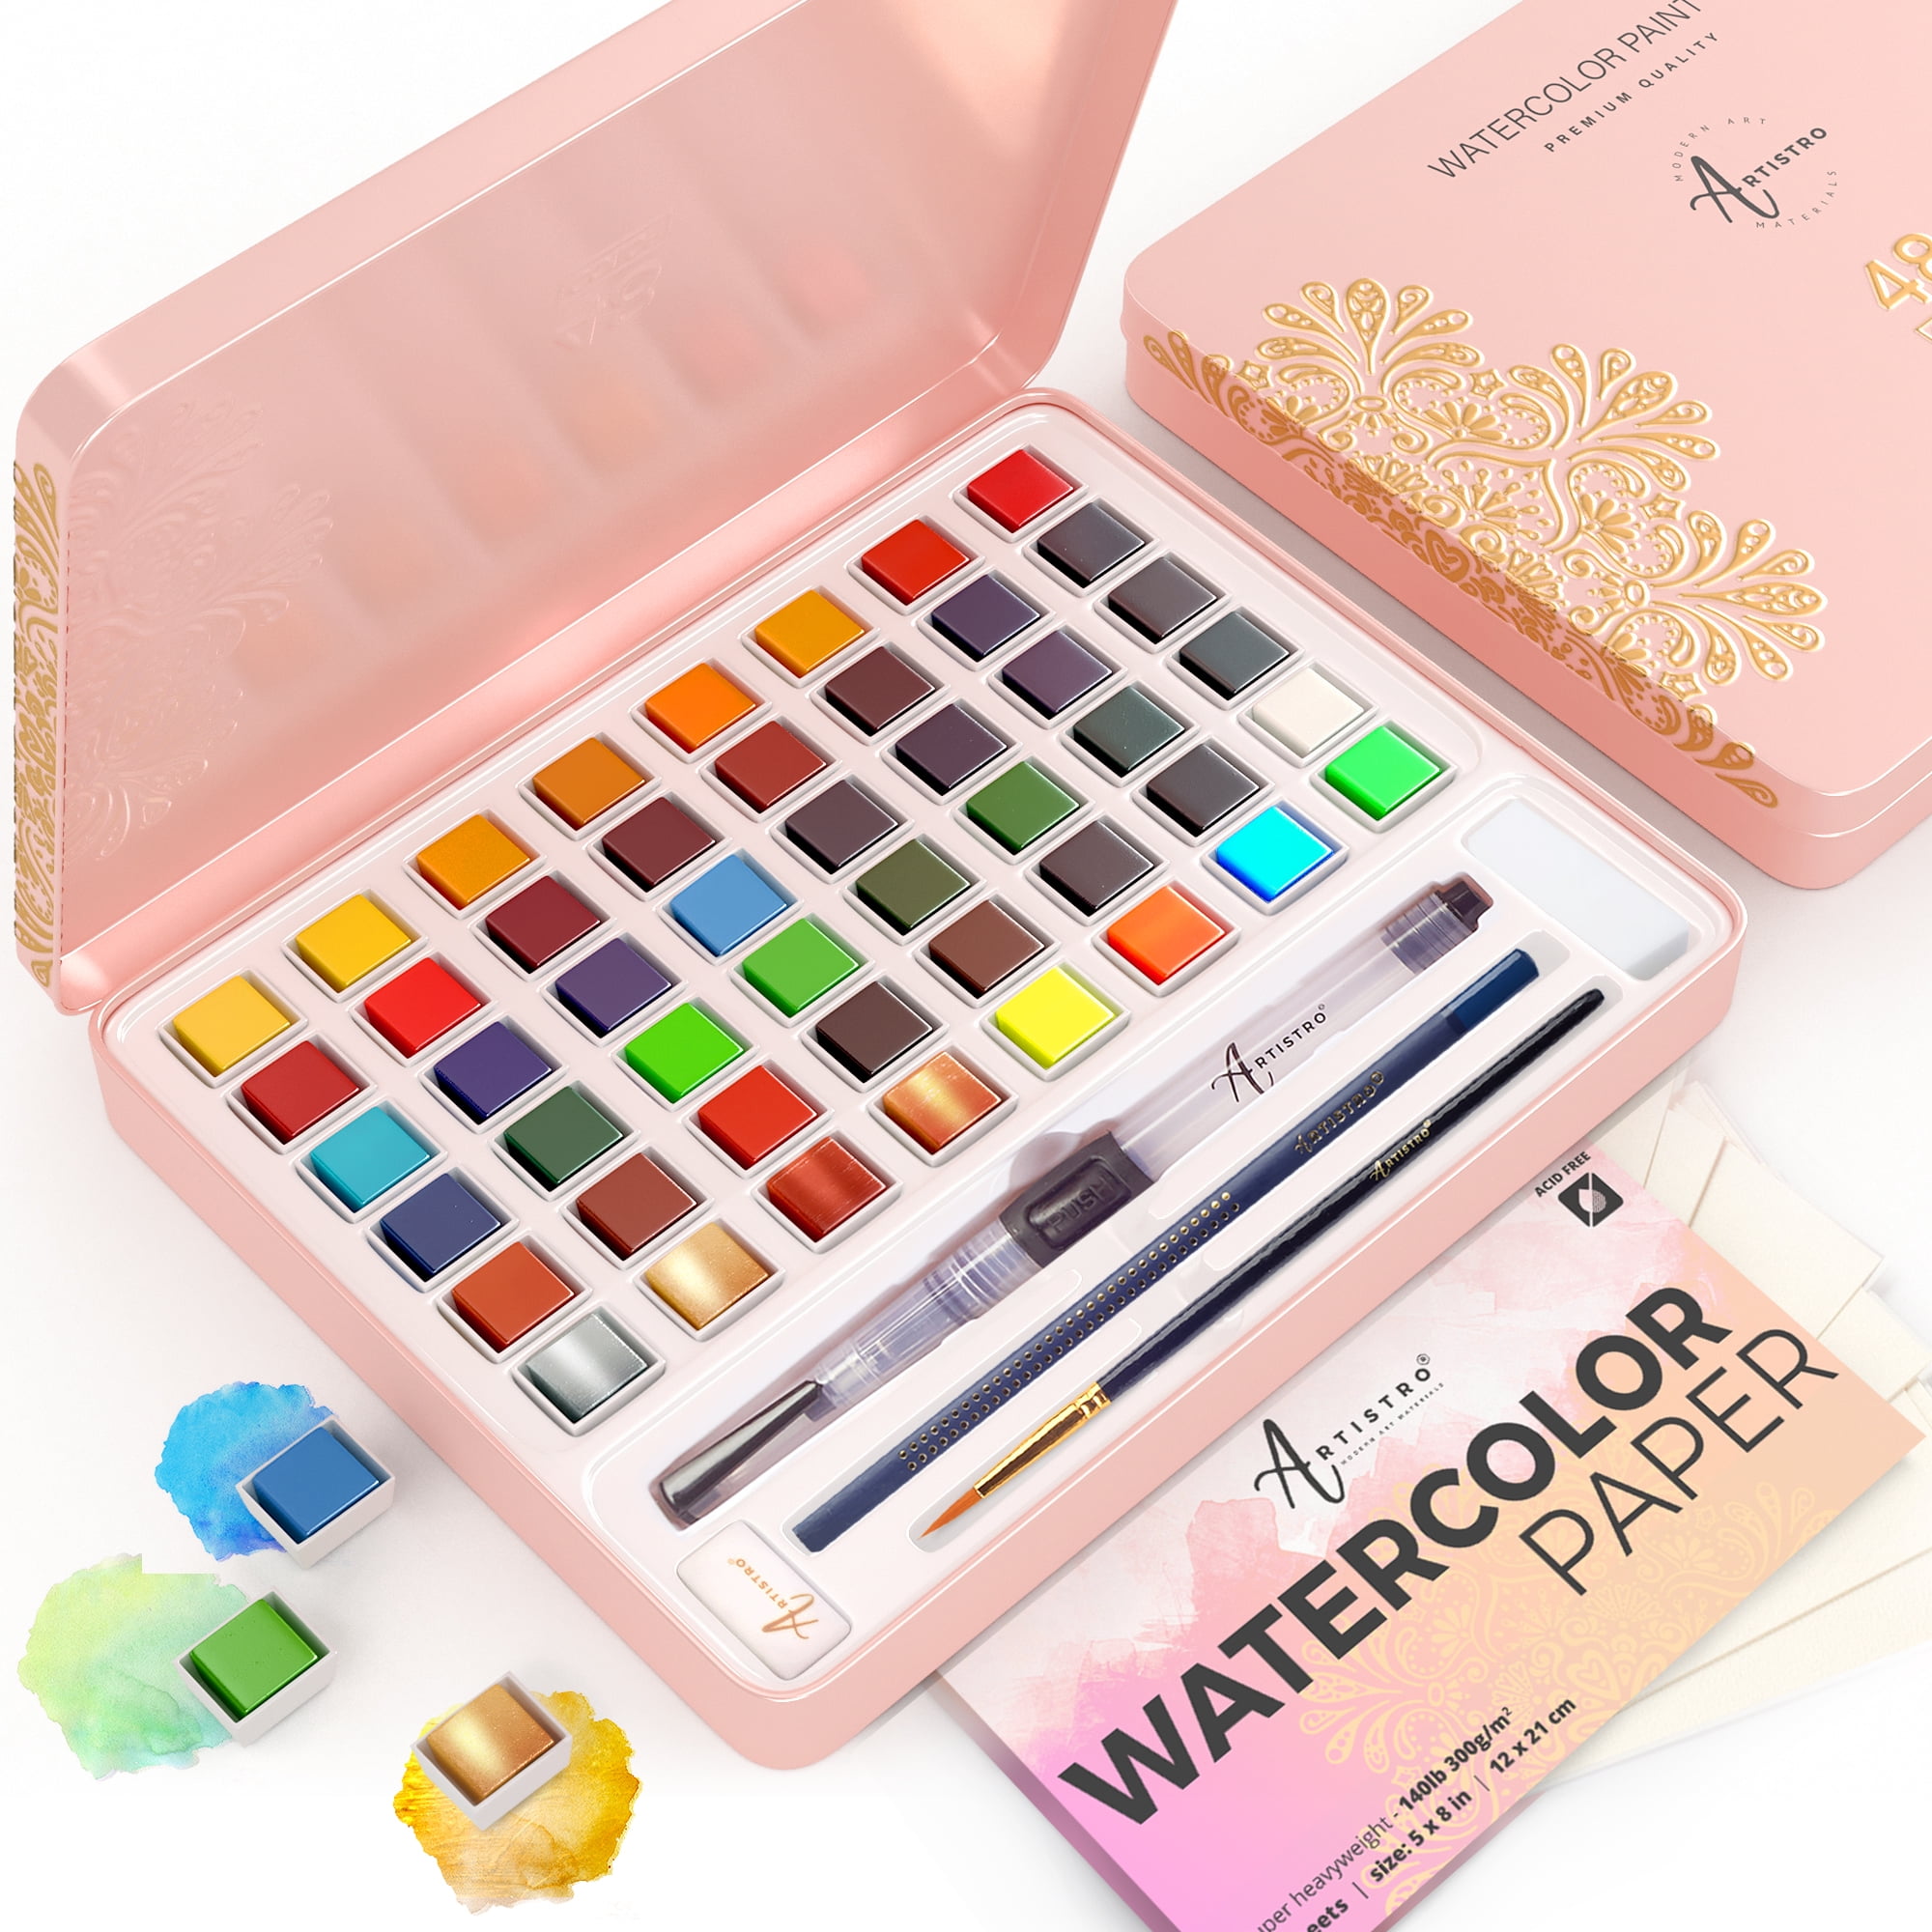 ARTISTRO Watercolor Paint Set, 48 Vivid Colors in Portable Box, Including  Metallic and Fluorescent Colors for Artists, Amateur Hobbyists and Painting  Lovers, Pe…